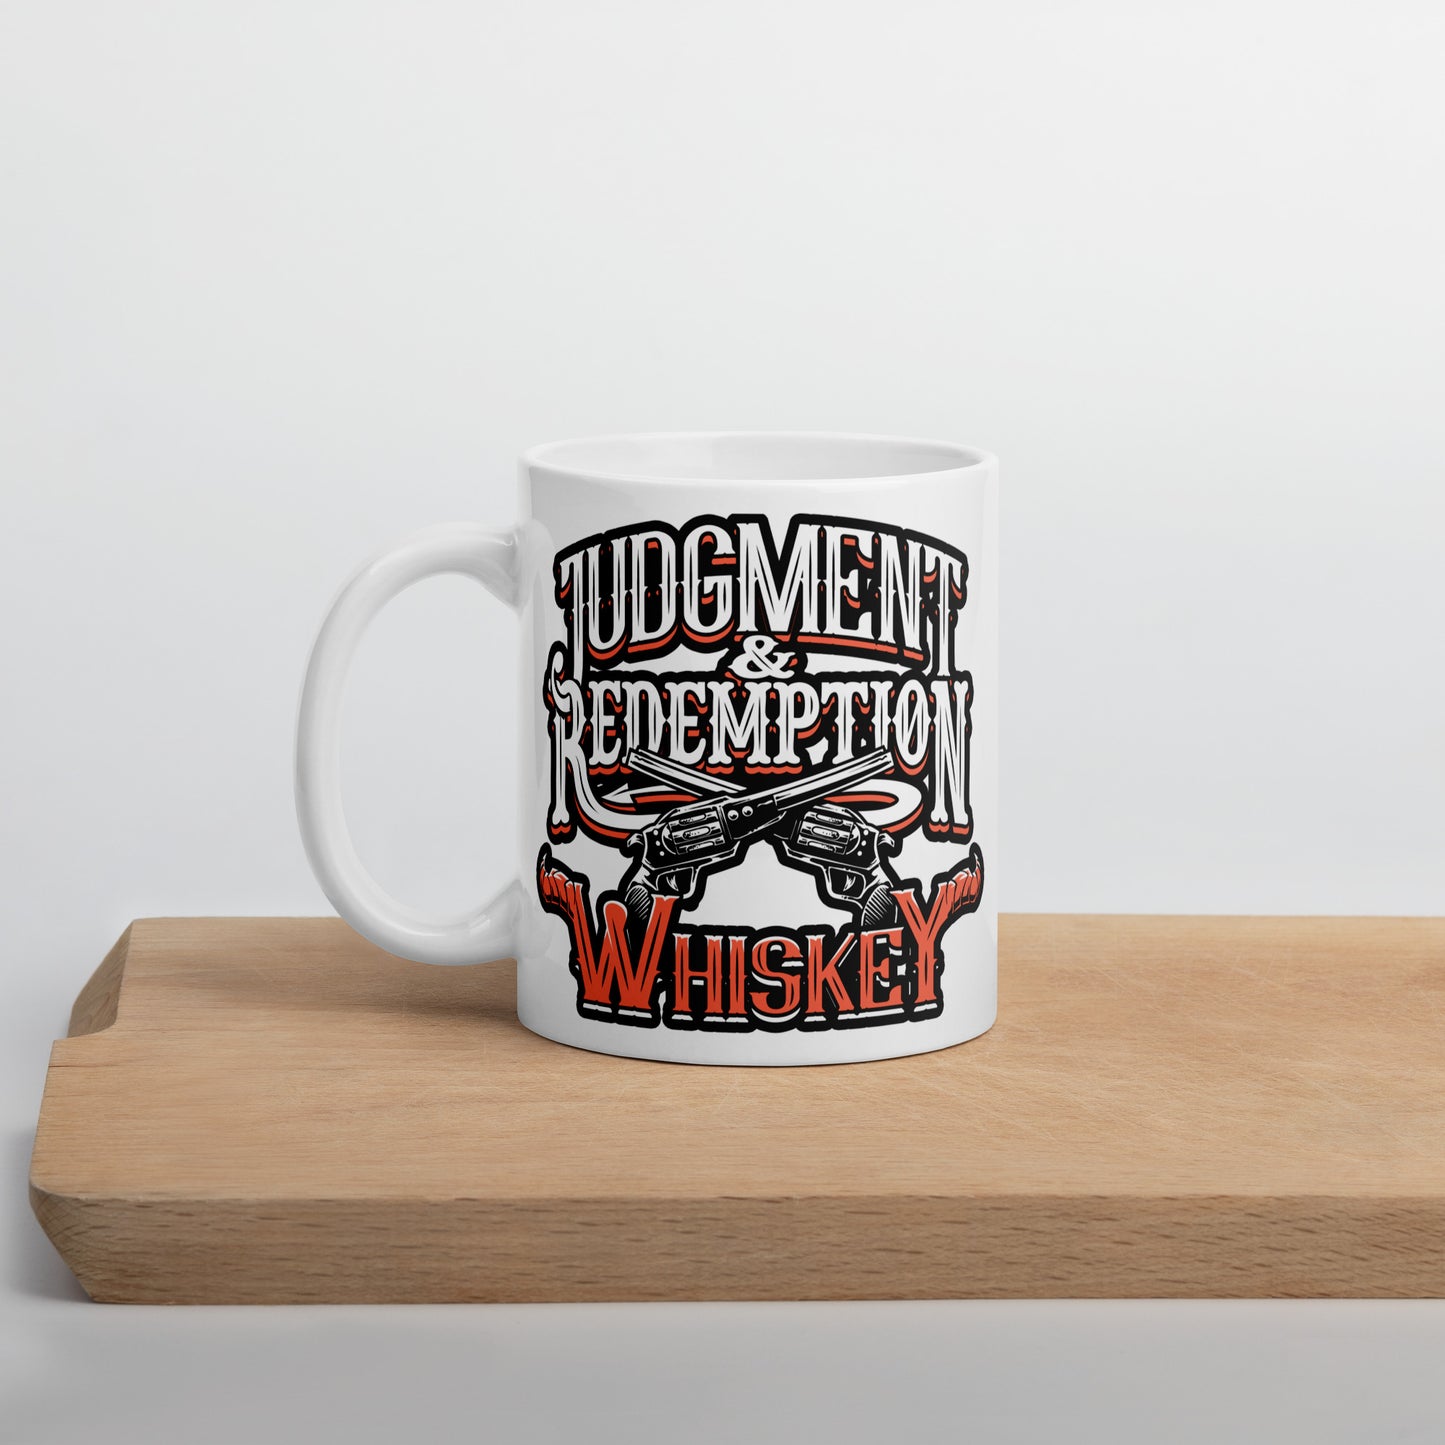 Judgment and Redemption - White Glossy Mug